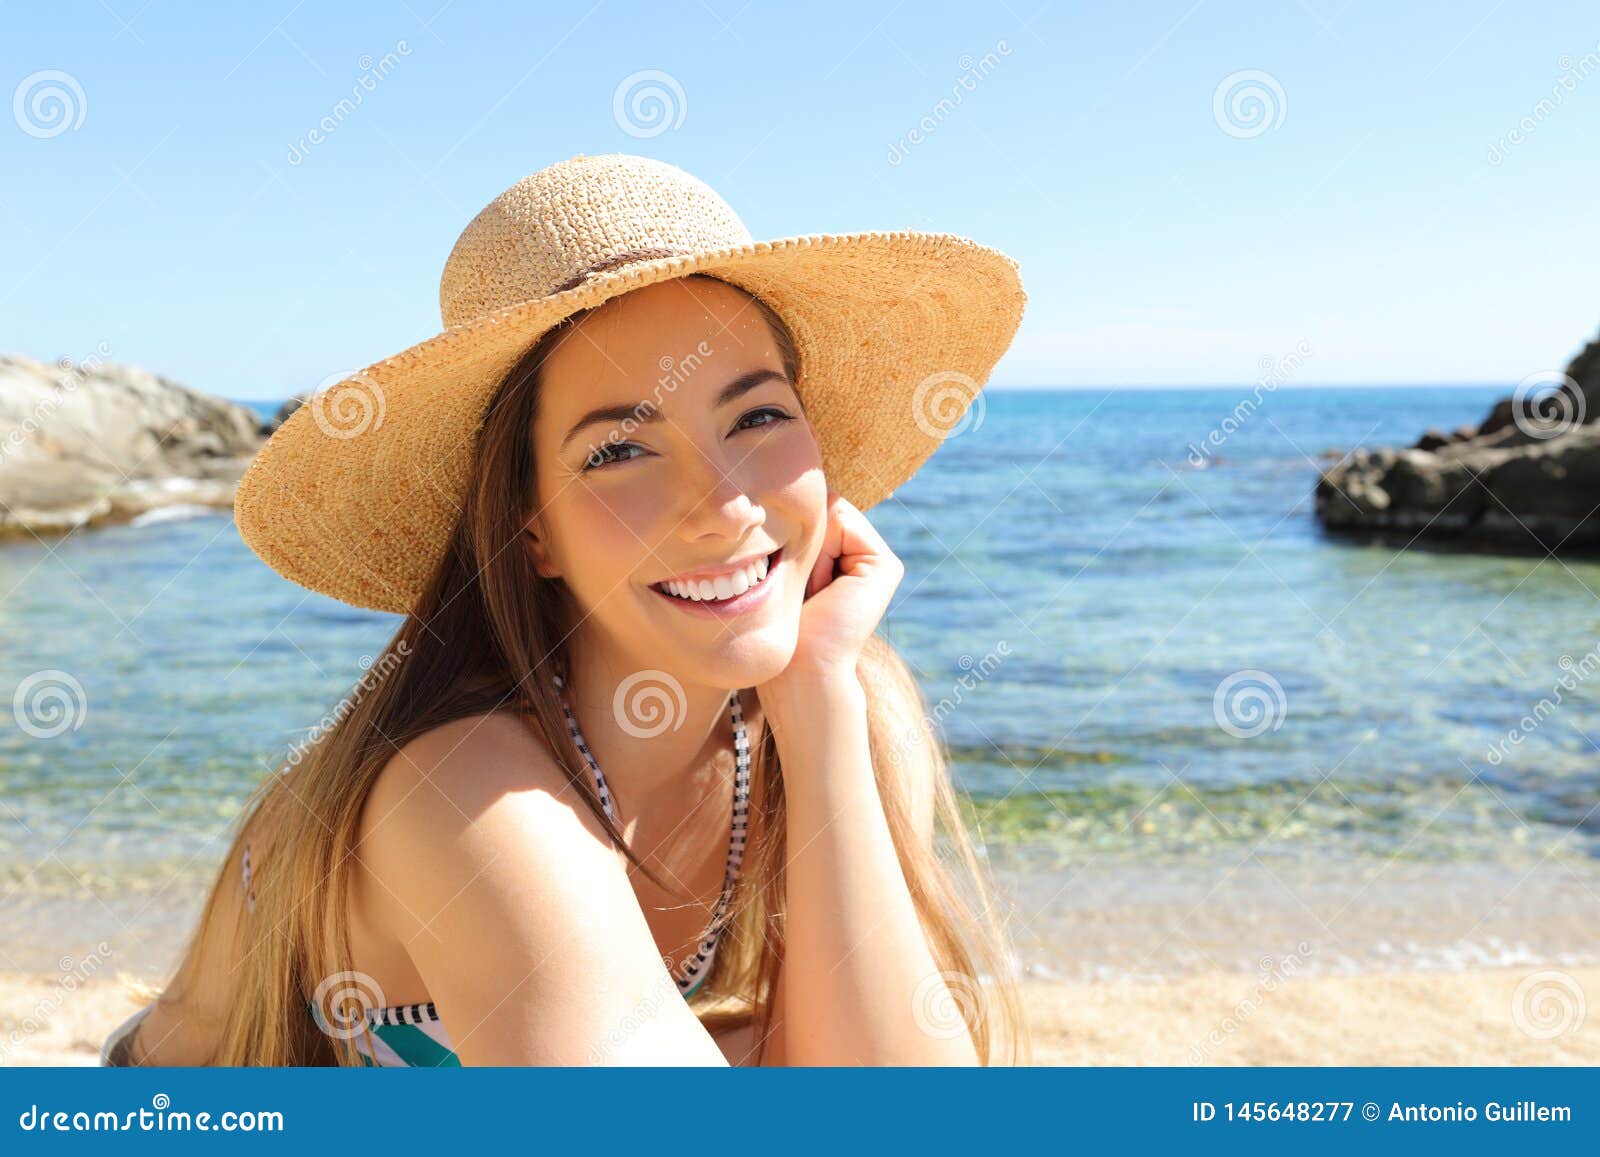 candid tourist on the beach looking at camera